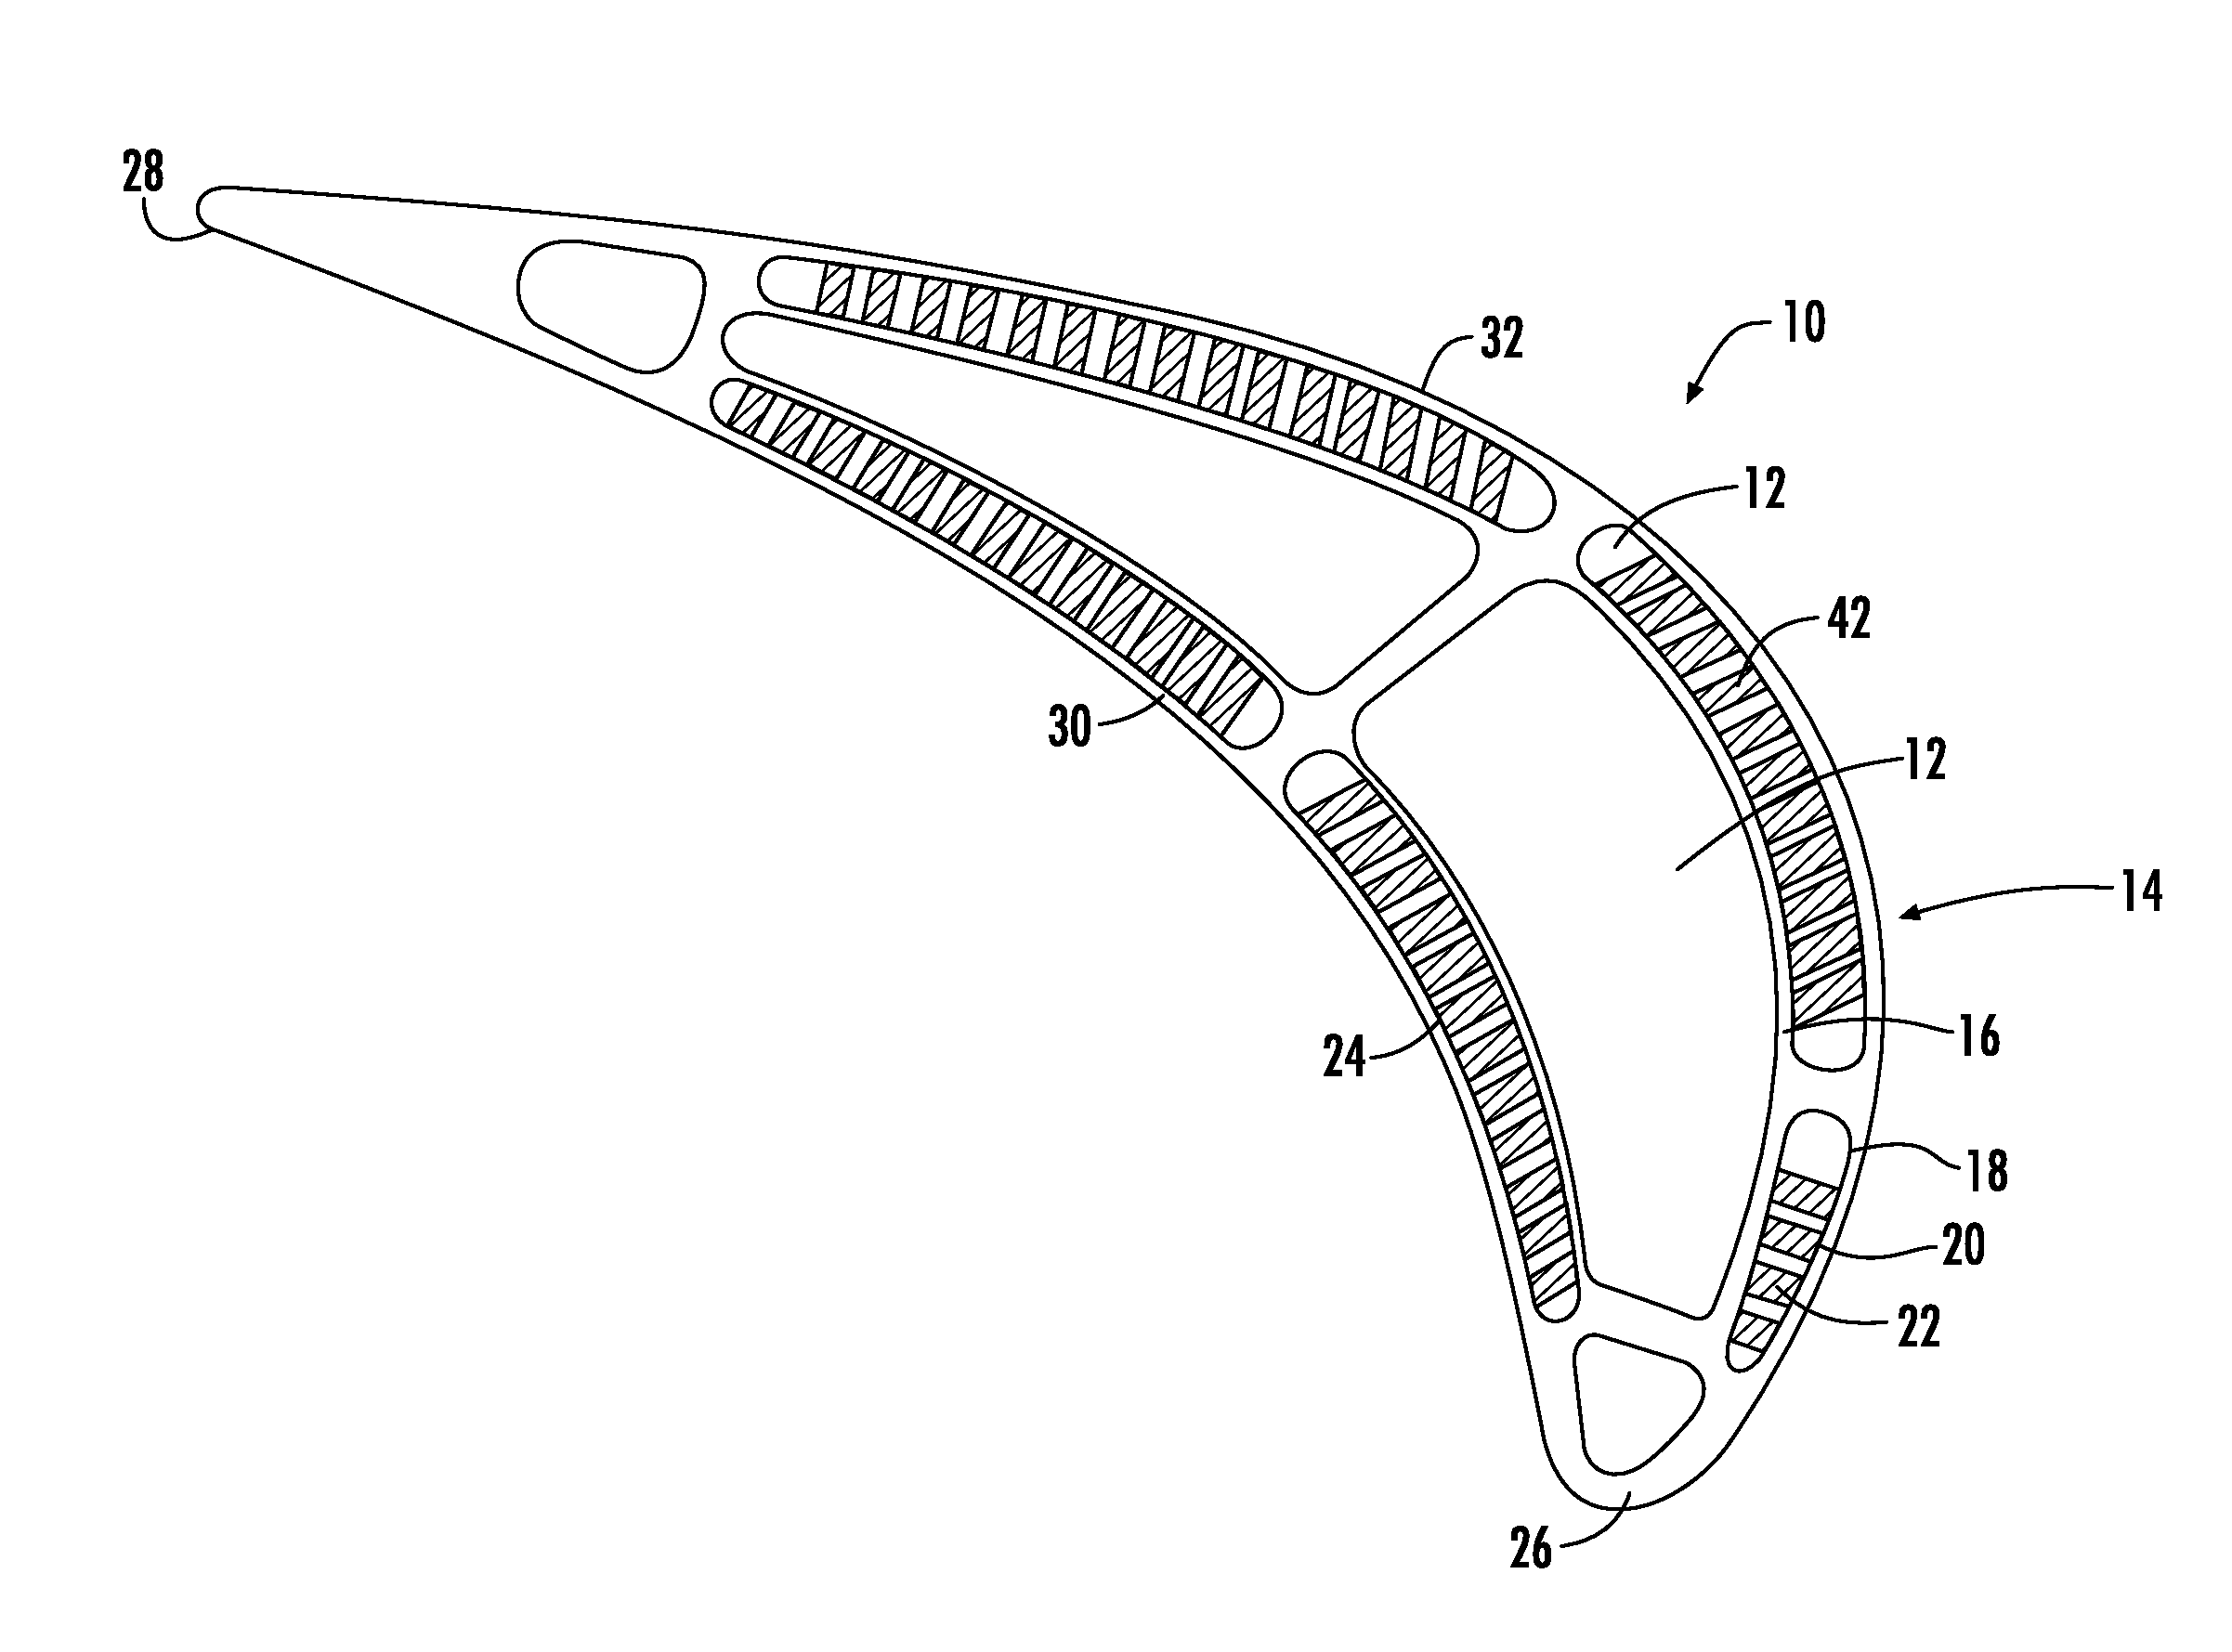 Turbine airfoil with dual wall formed from inner and outer layers separated by a compliant structure